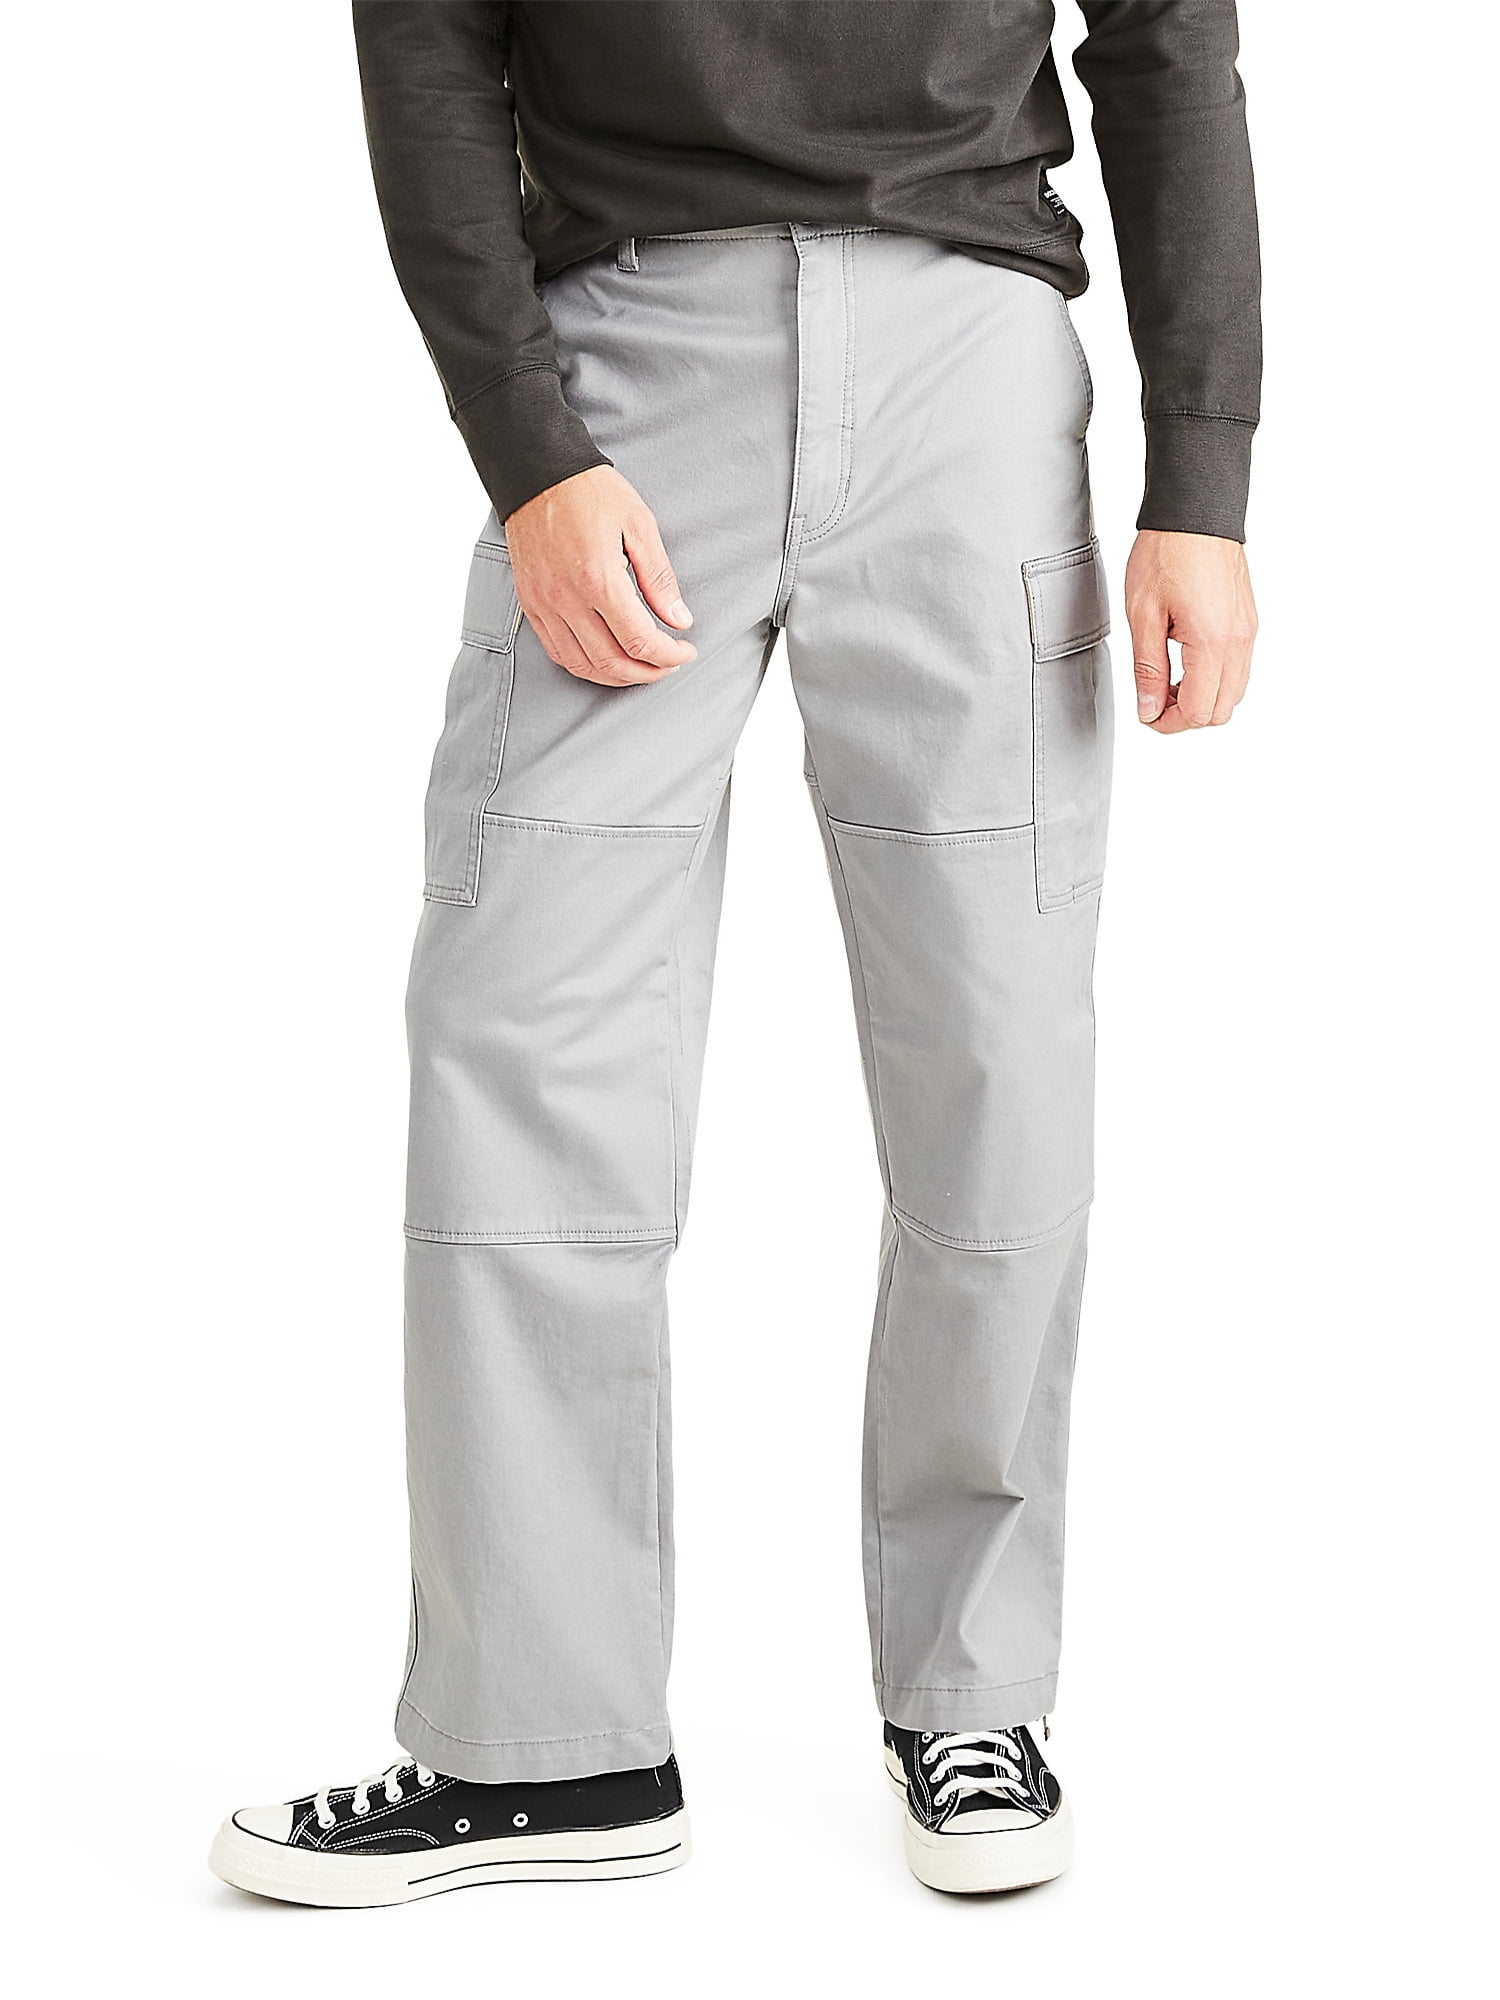 Dockers Men's Relaxed Fit Cargo Pants | lupon.gov.ph